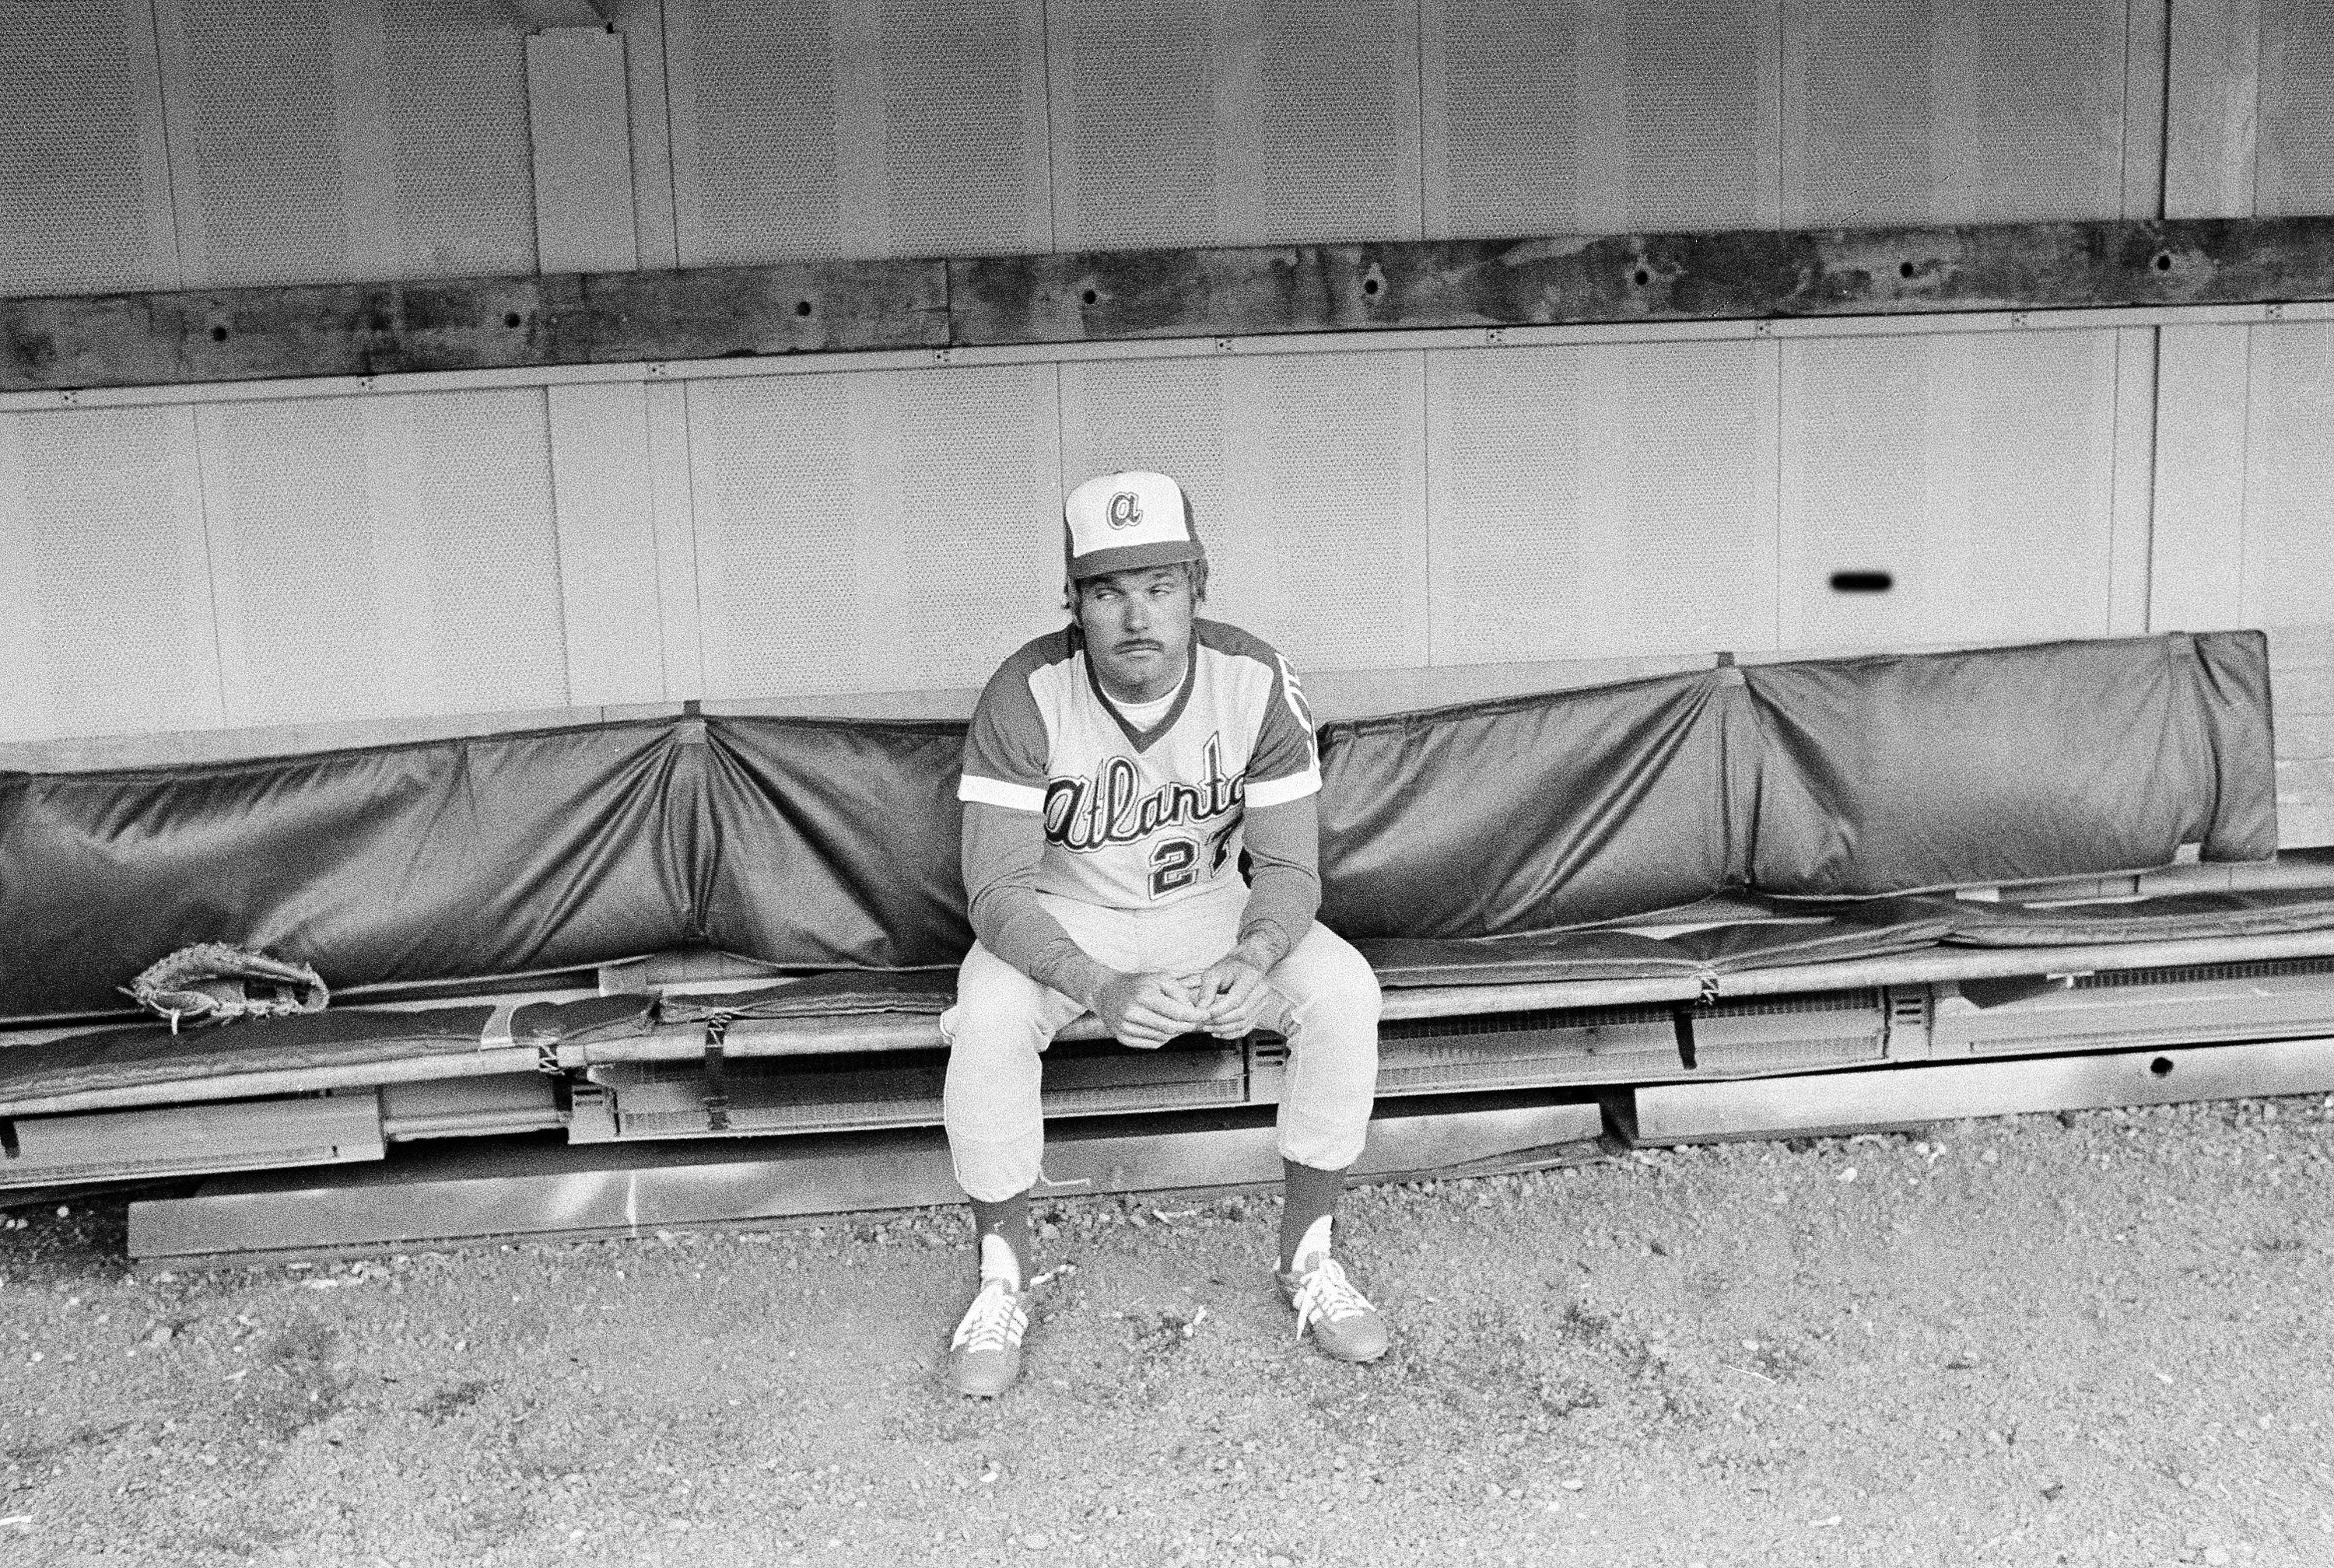 May 11, 1977 game: Owner Ted Turner makes himself Braves' manager